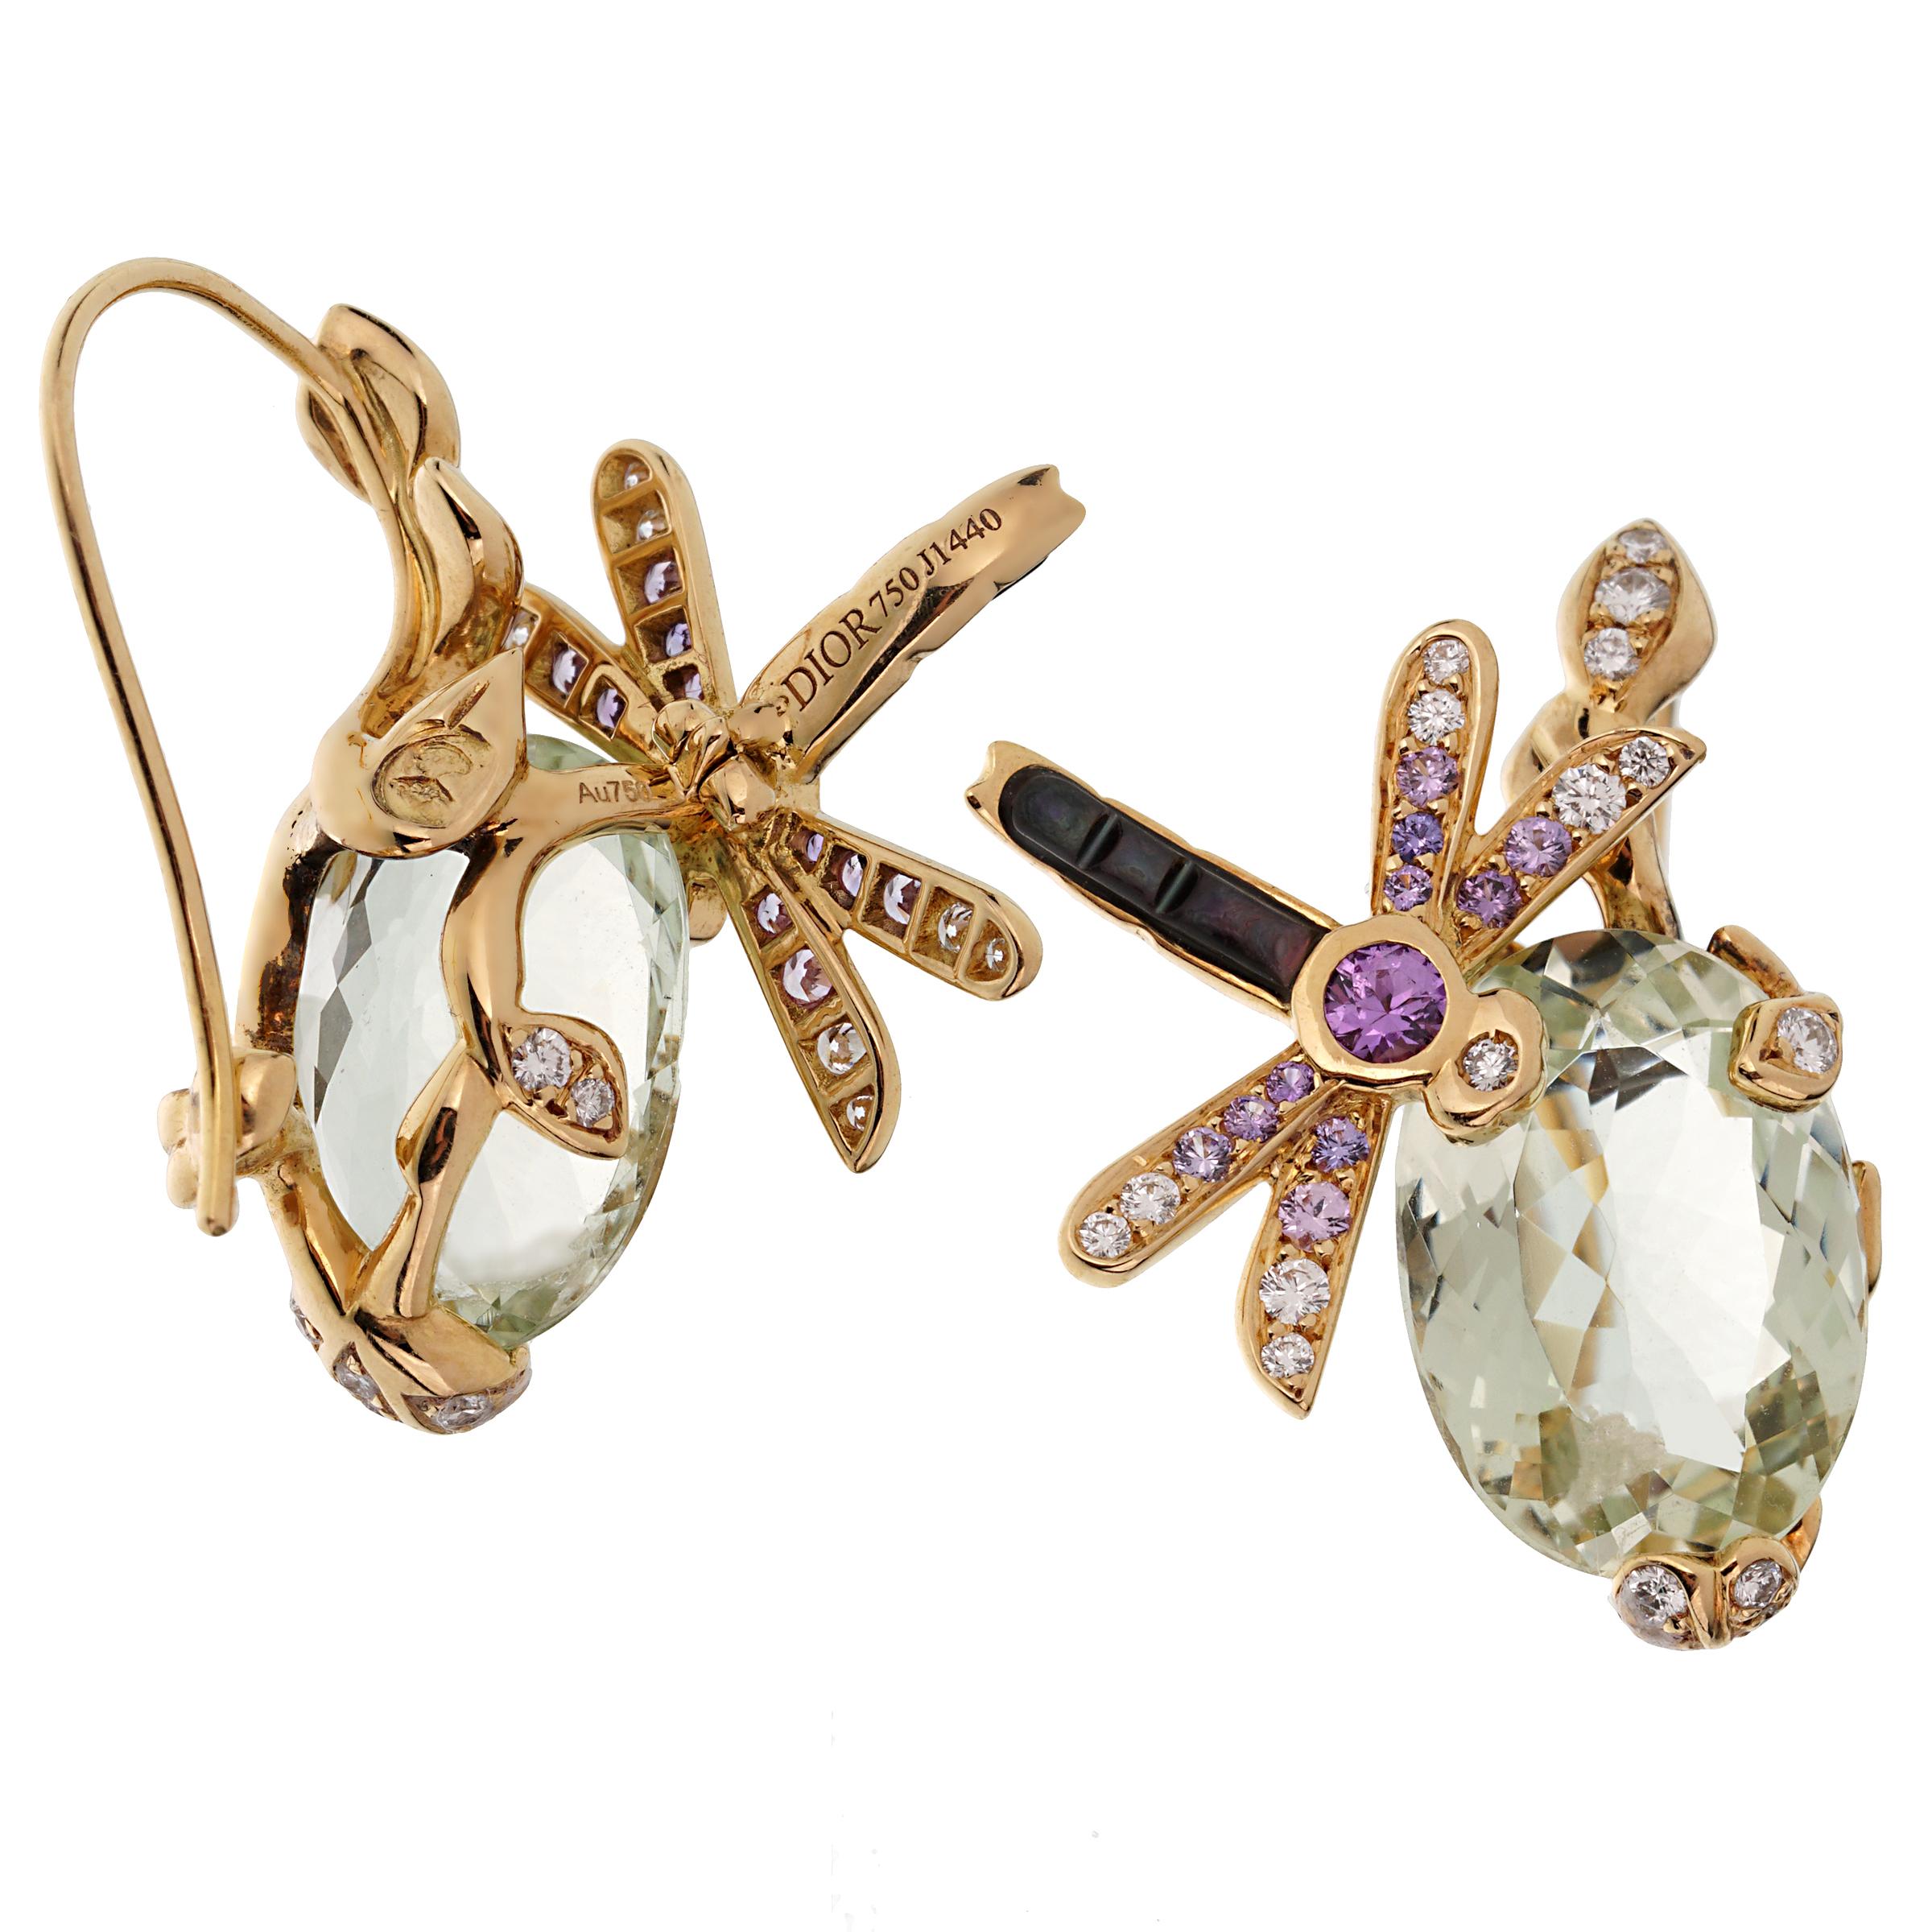 An incredible set of light and airy Christian Dior earrings showcasing a dragonfly motif set with round brilliant cut diamonds and bright beautiful multicolored sapphires atop of a oval shaped green beryl in shimmering 18k yellow gold.

Dior Retail: